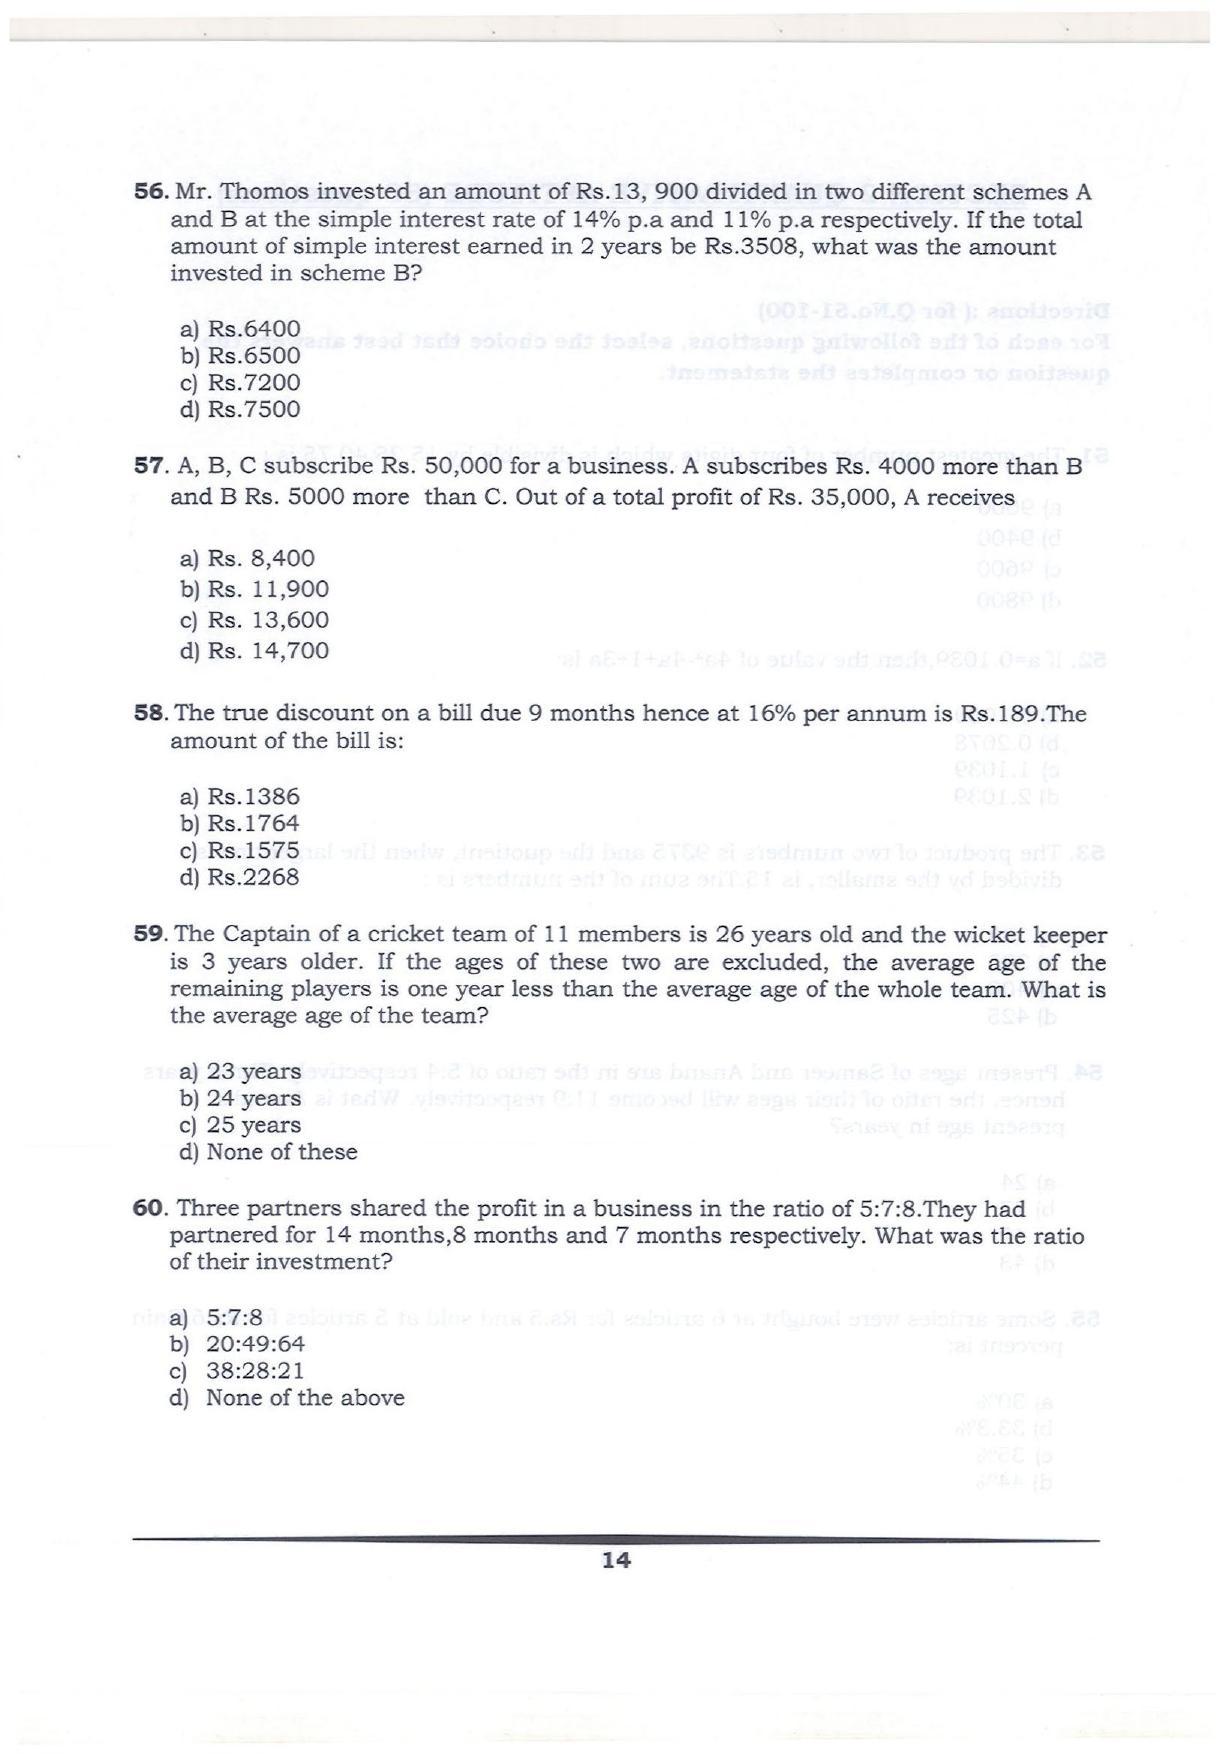 KMAT Question Papers - February 2018 - Page 13